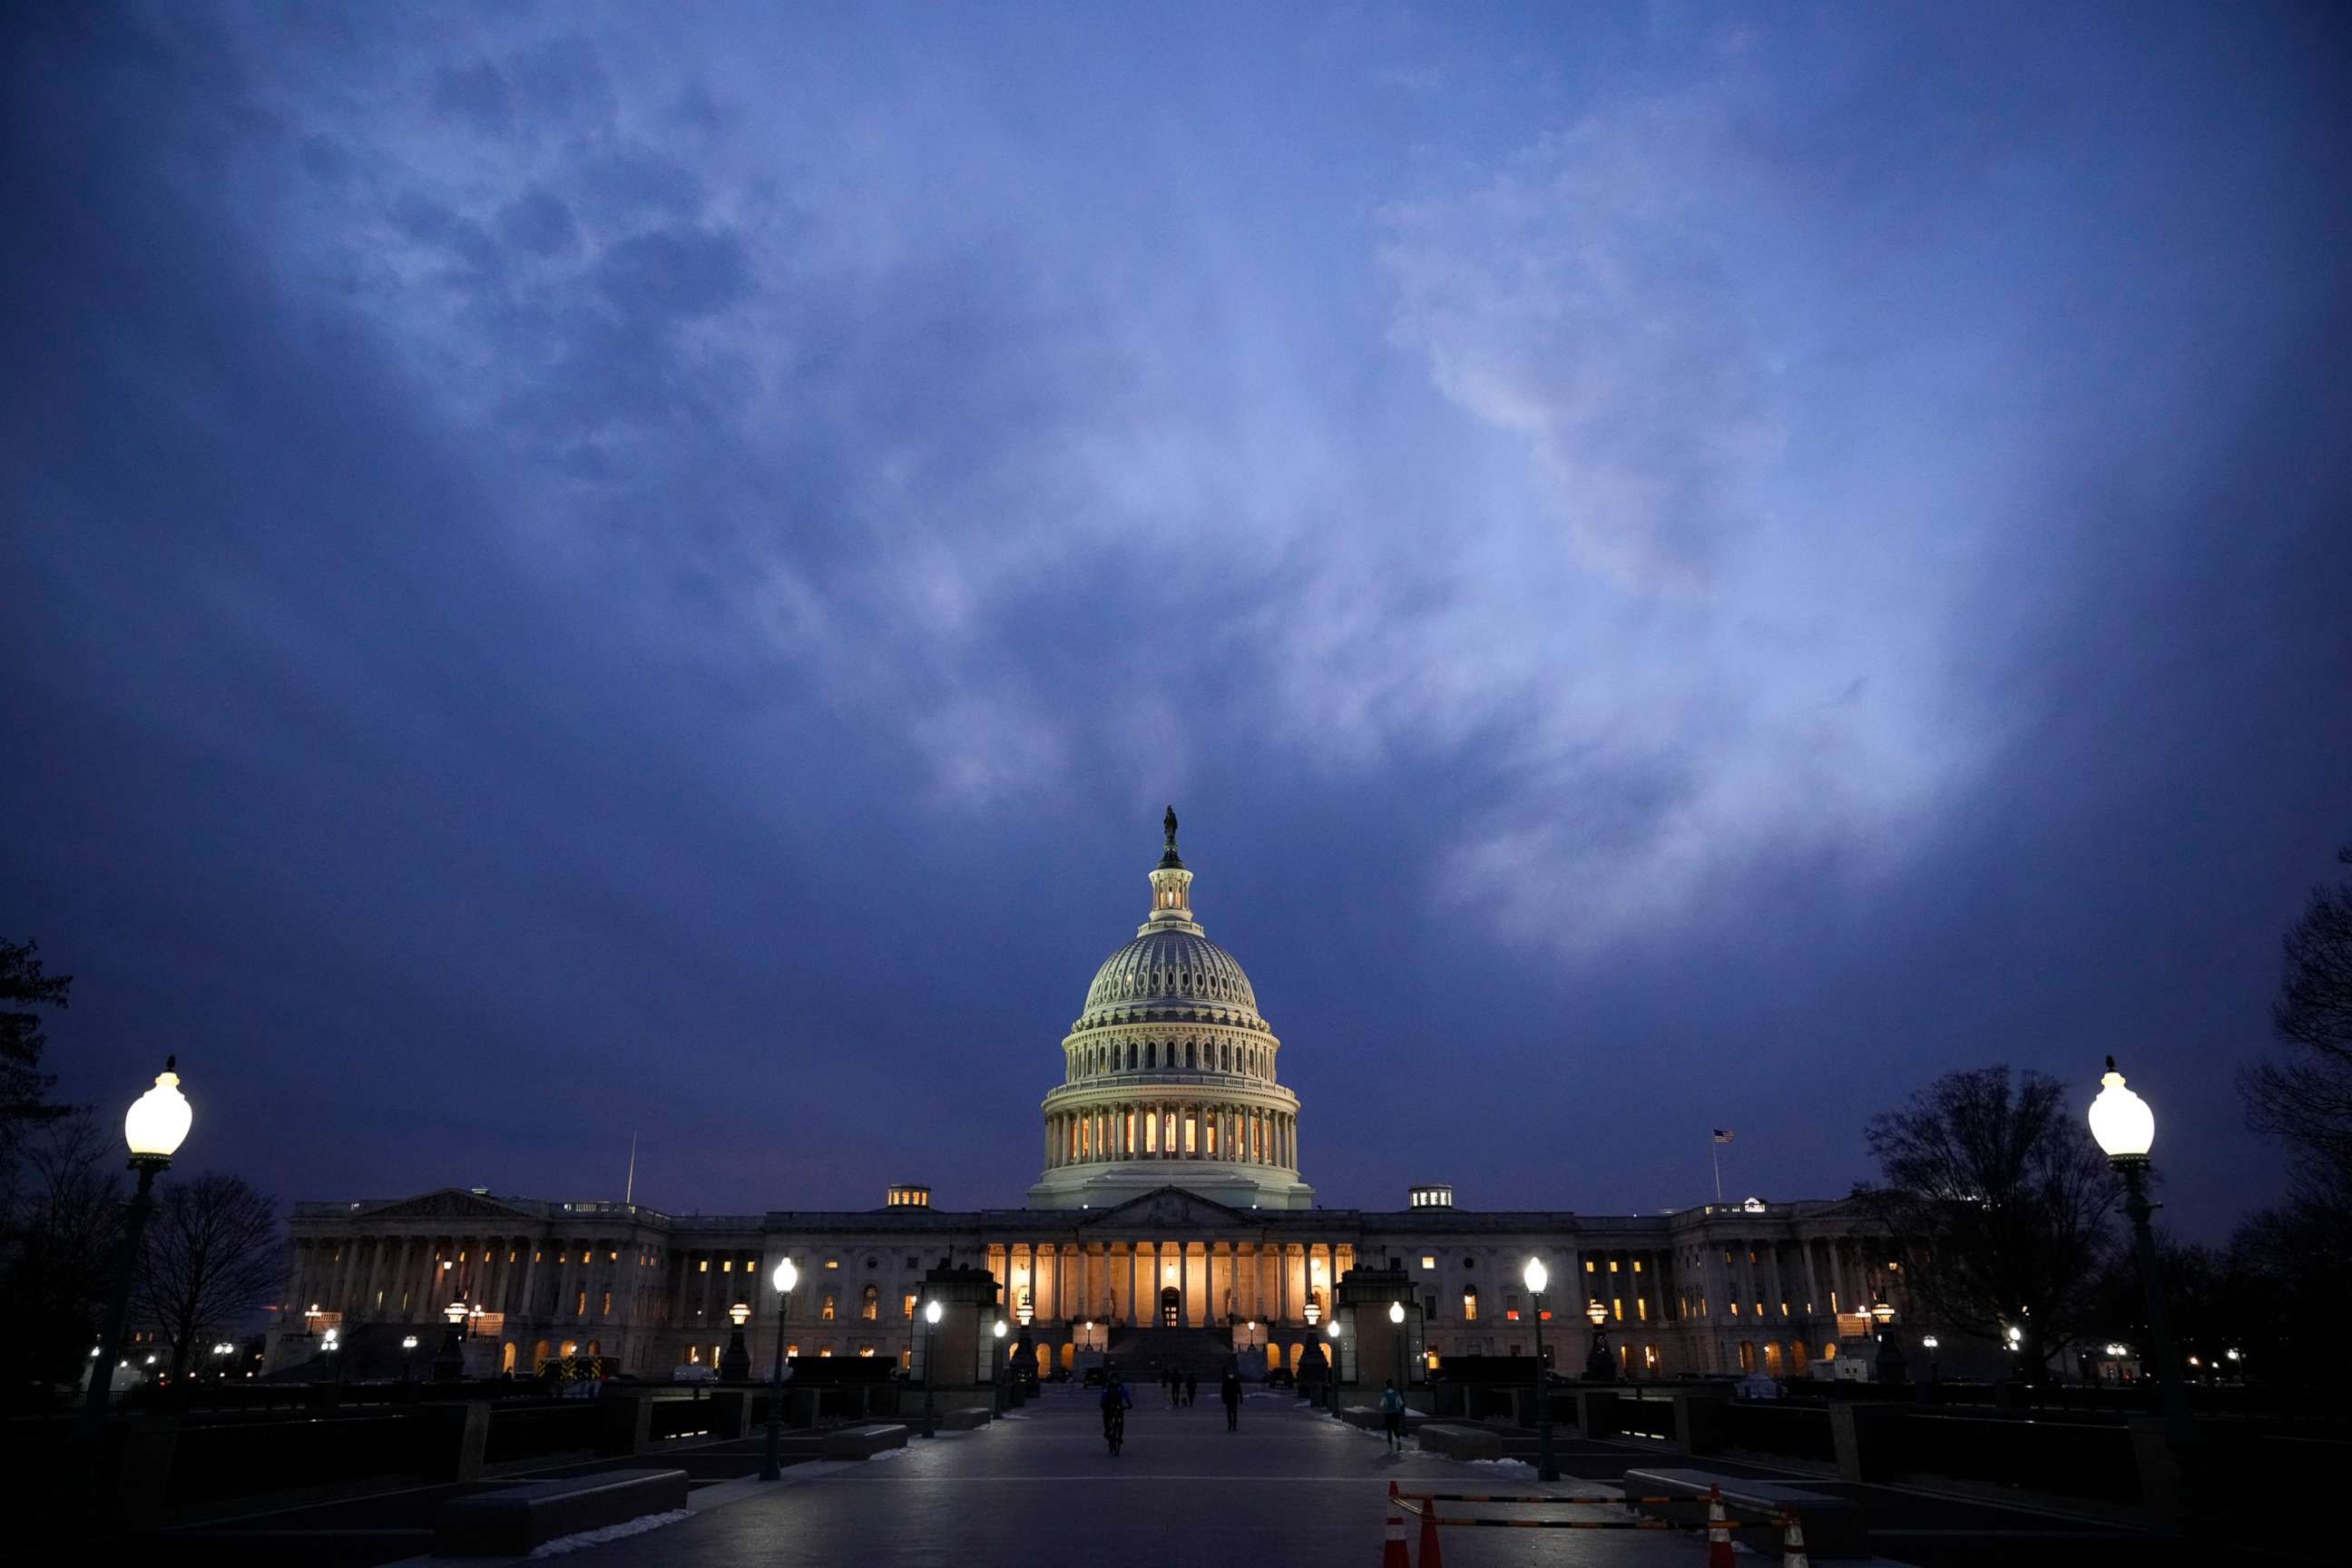 PHOTO: A view of the U.S. Capitol on Jan. 19, 2022 in Washington, D.C.